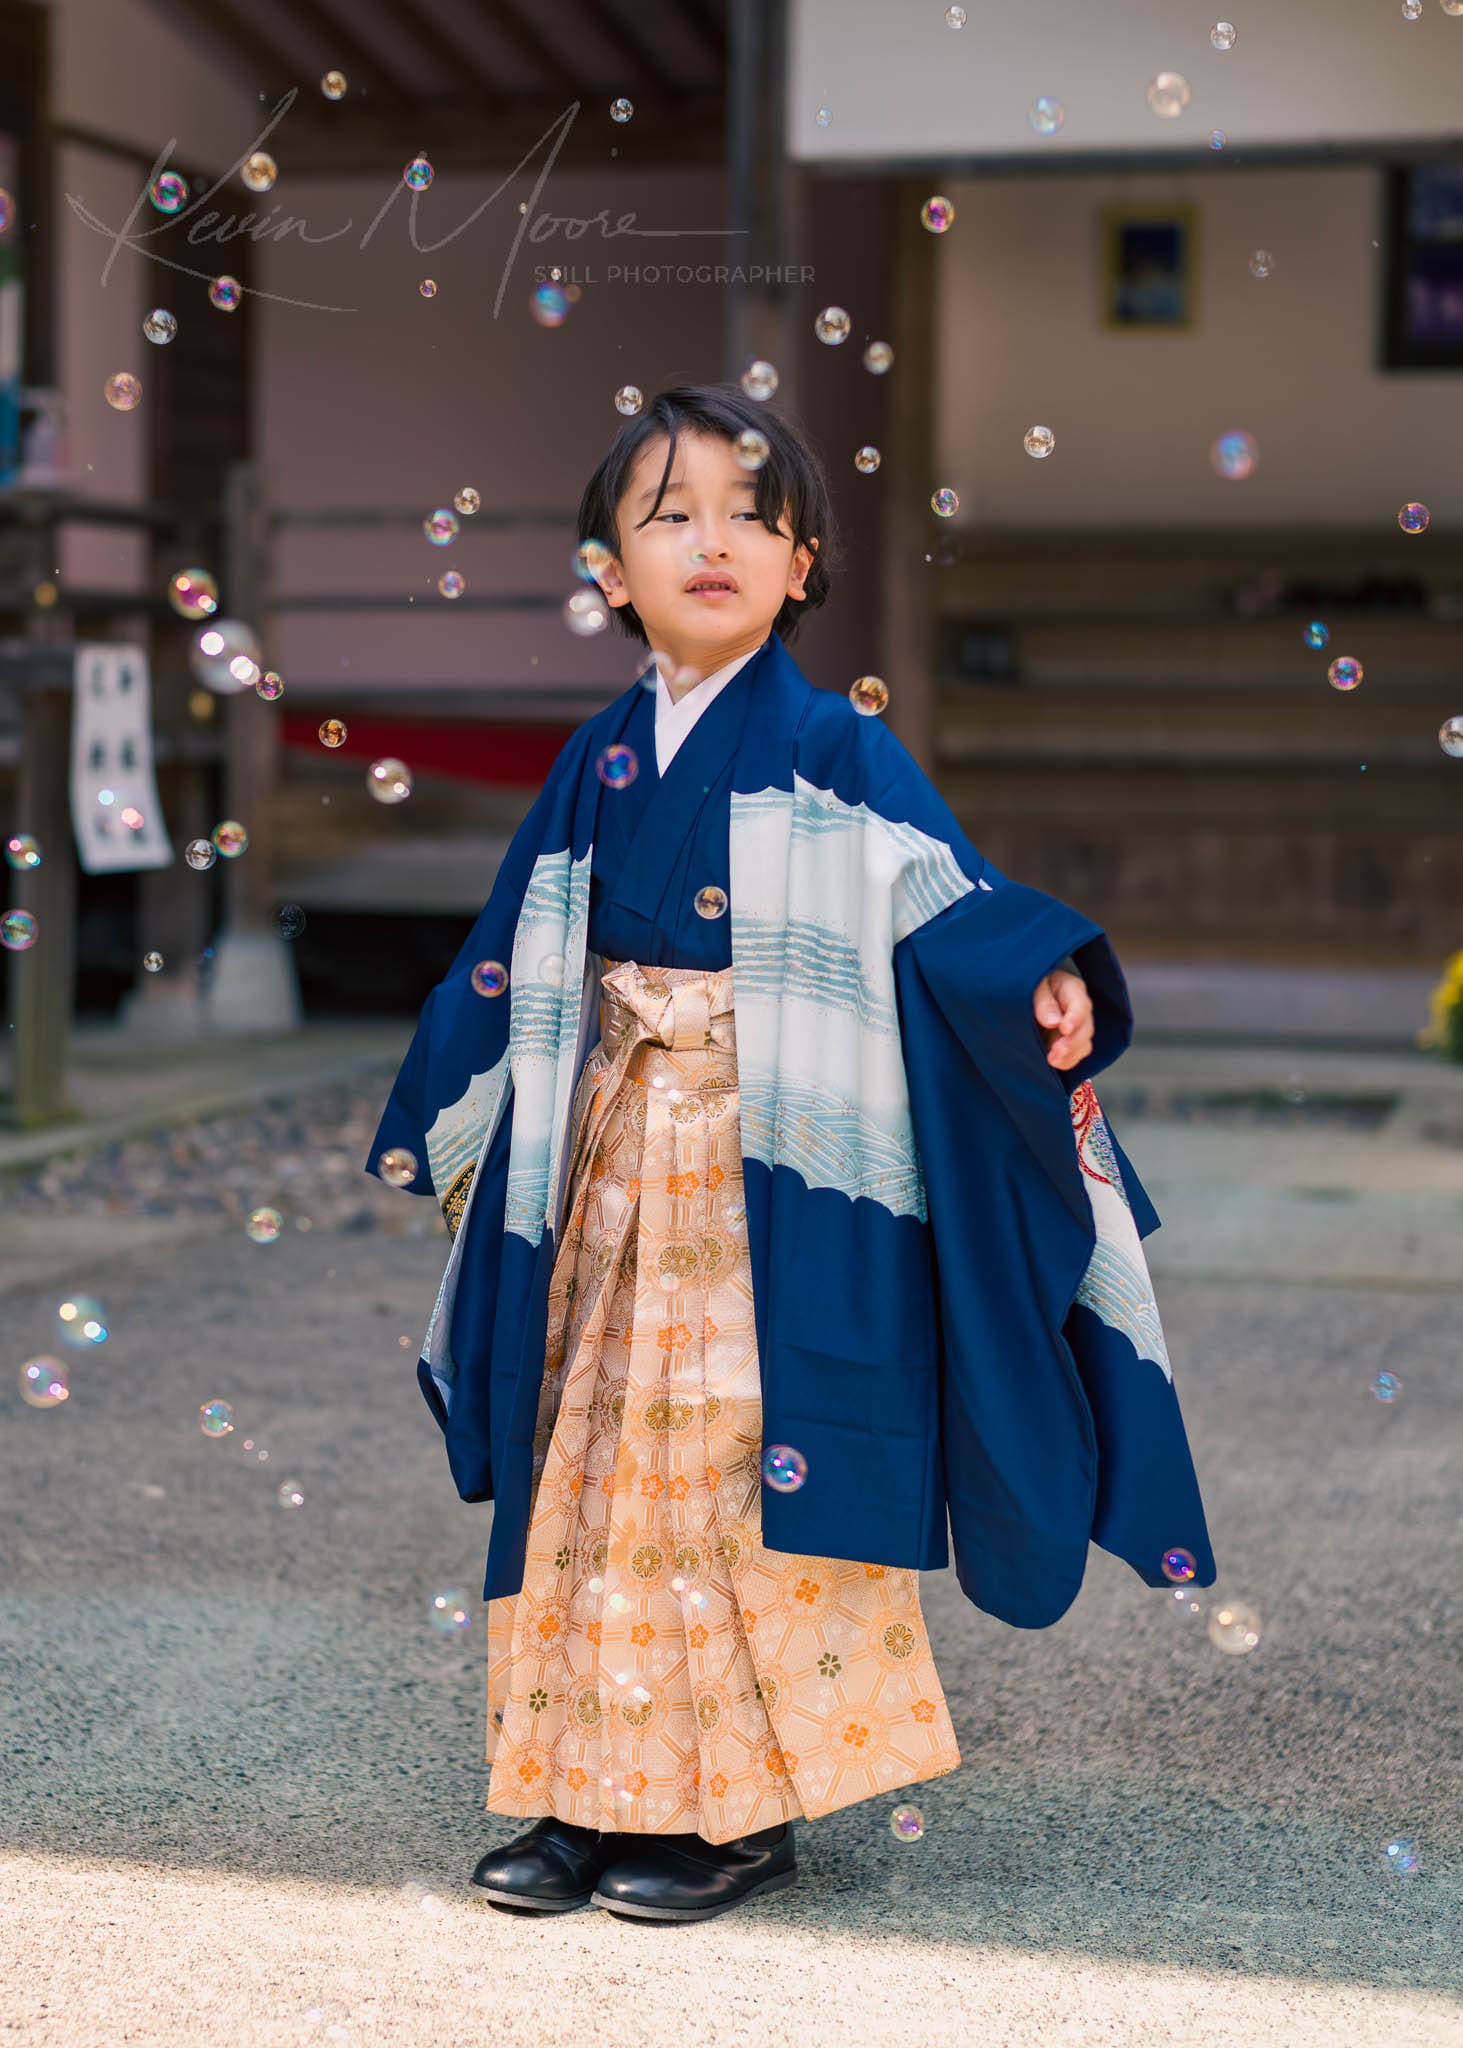 Child in traditional Japanese attire playing with bubbles outdoors.